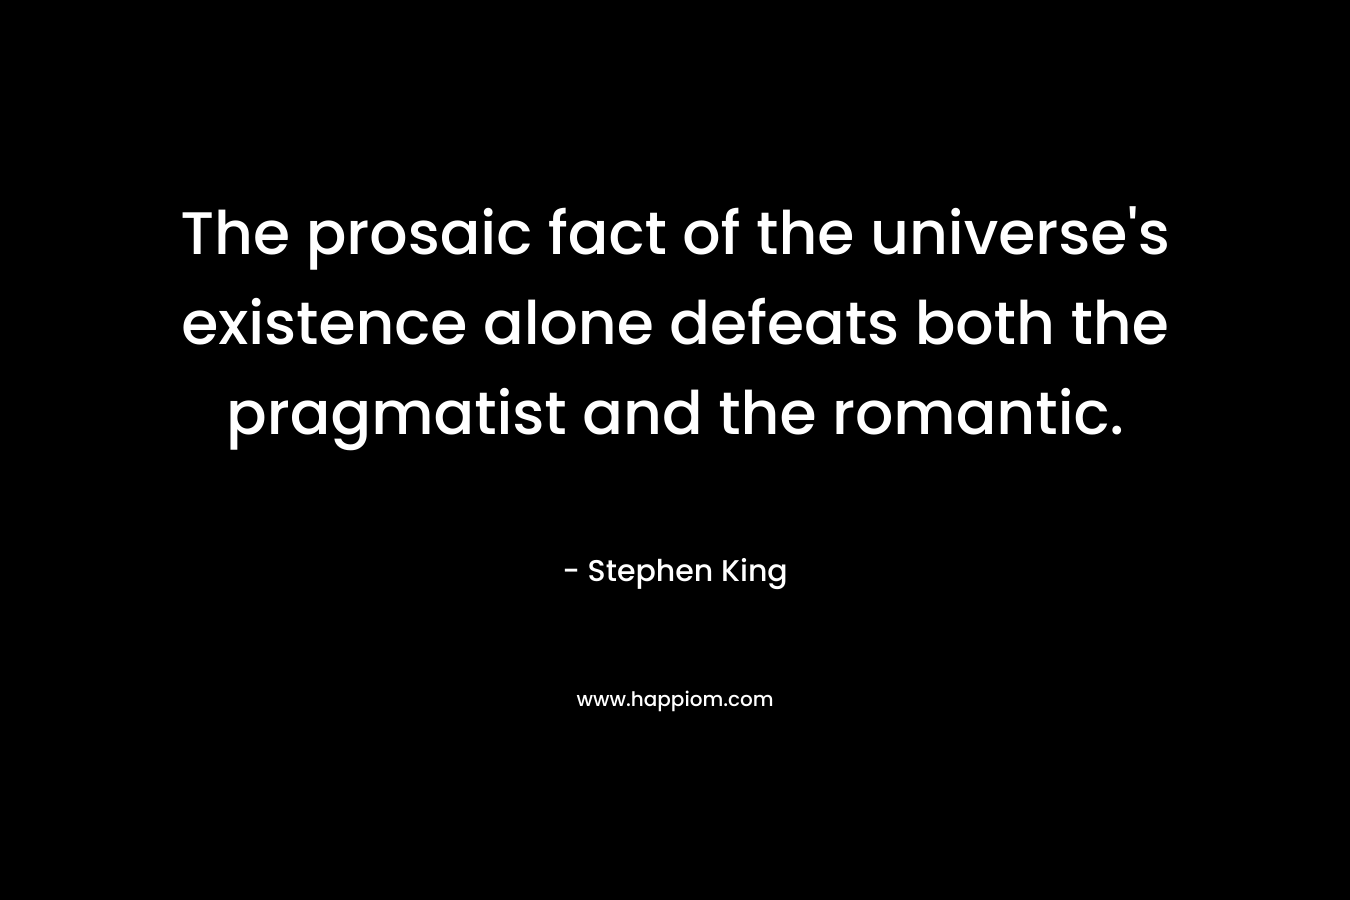 The prosaic fact of the universe’s existence alone defeats both the pragmatist and the romantic. – Stephen King